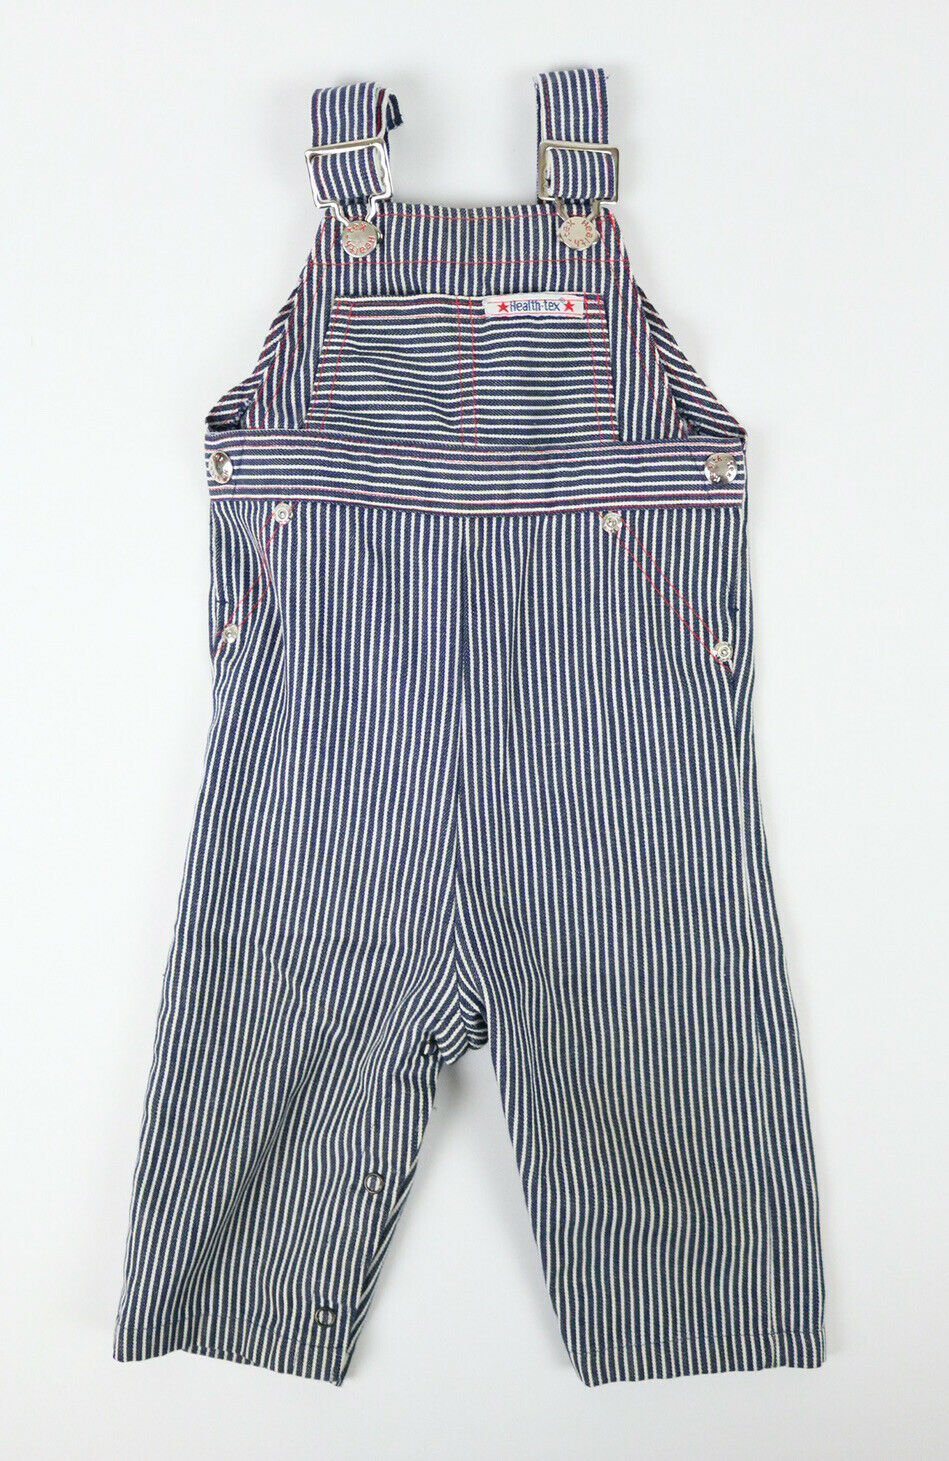 Vintage Baby Toddle Health Tex Hickory Stripe Overalls Bibs 18 Mos Made In USA